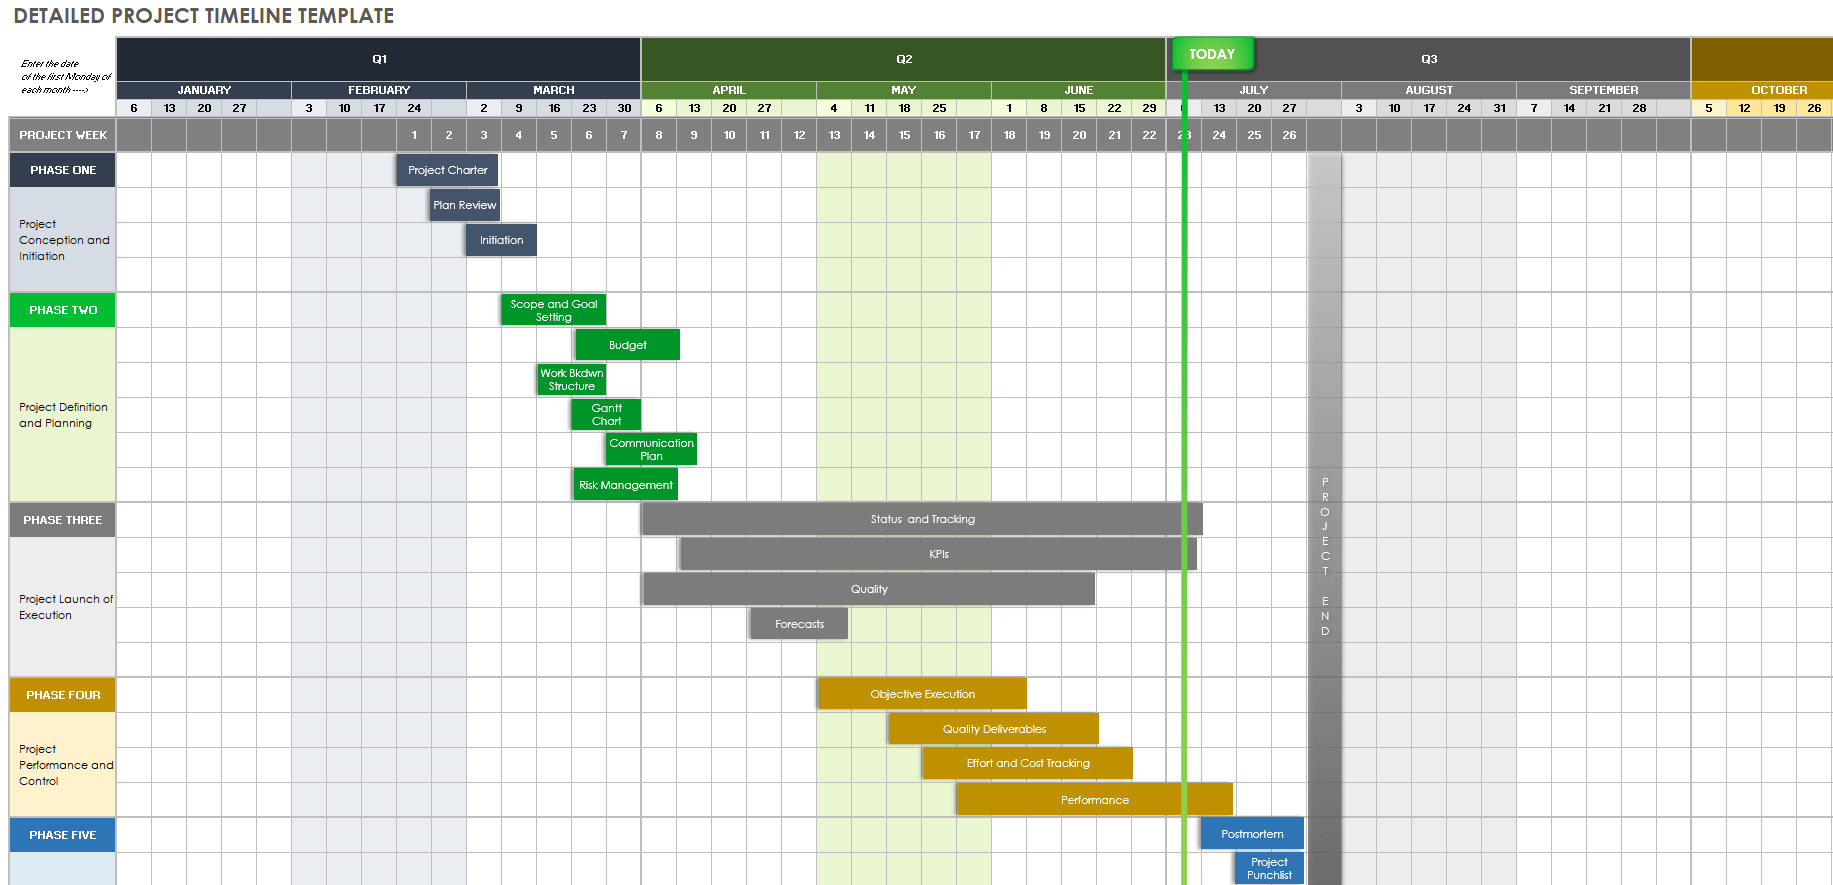 Detailed Project Timeline Template